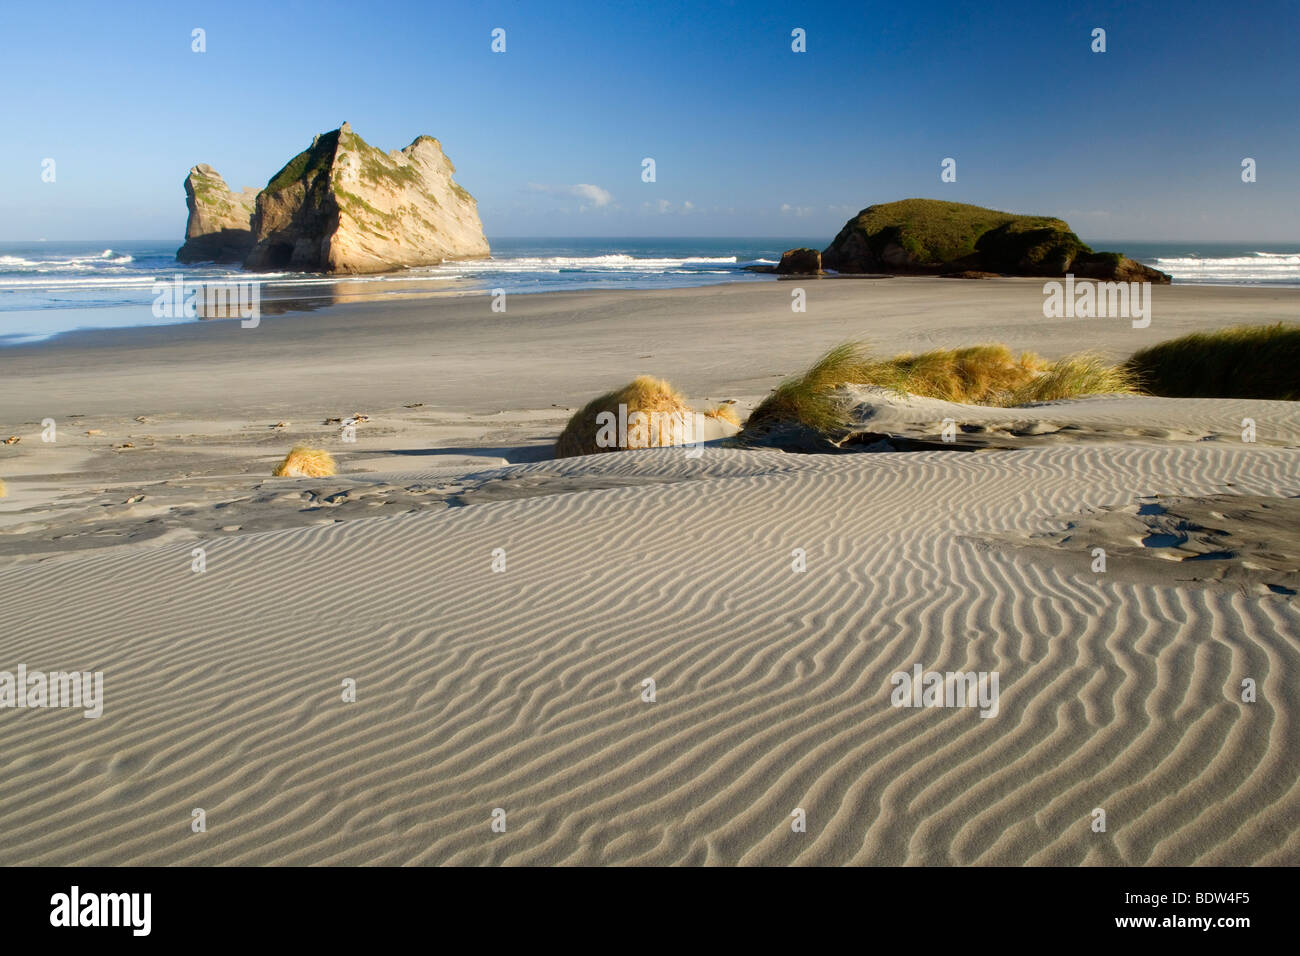 sand dunes and by powerful surf sculpted rock islands with caves and arches at Wharariki beach, New Zealand Stock Photo